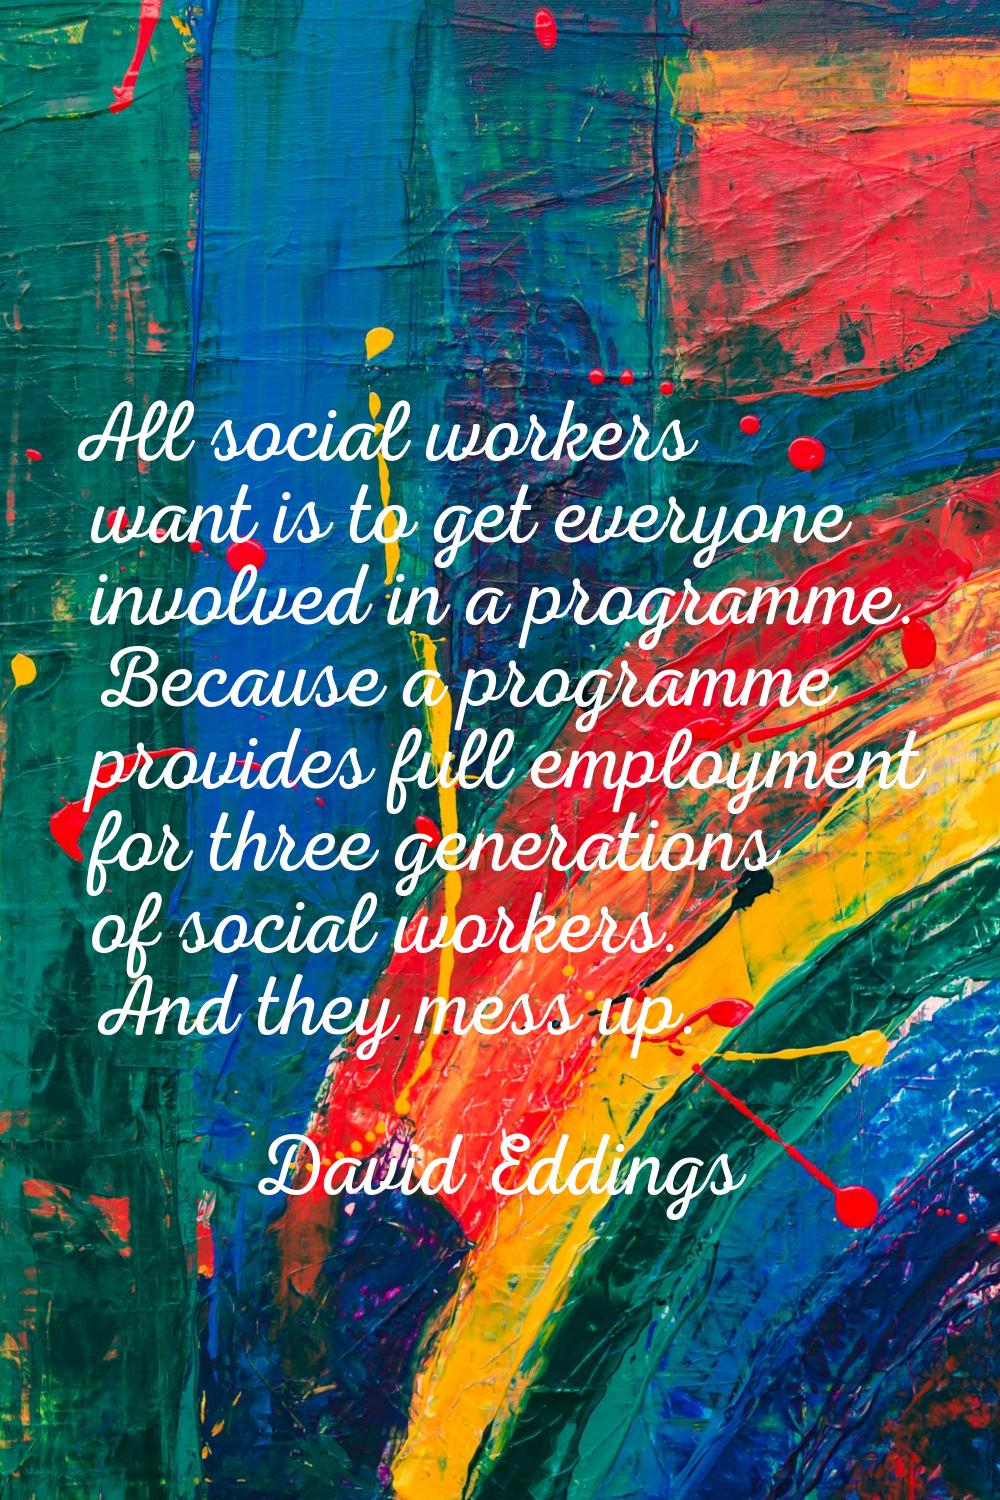 All social workers want is to get everyone involved in a programme. Because a programme provides fu